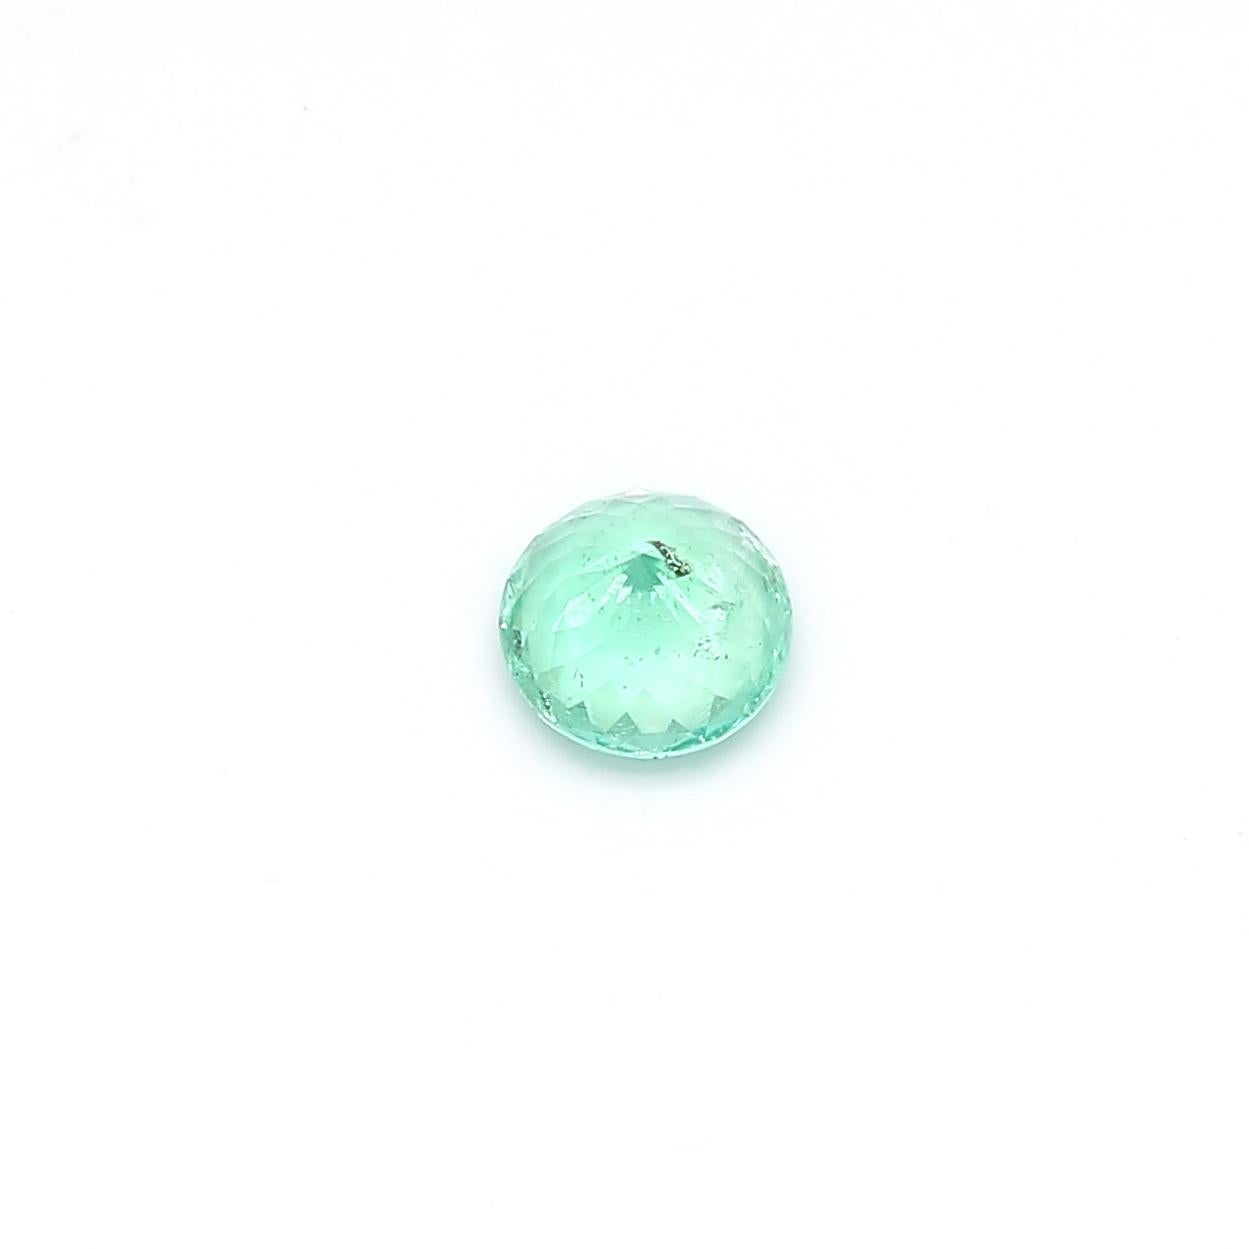 Emerald is a green variety of beryl. Its name has been derived from the ancient Greek word for emerald, ēmera. Emerald from Russian Region a very appreciated over the world because of its clarity and neon green color. Because of its unique color,